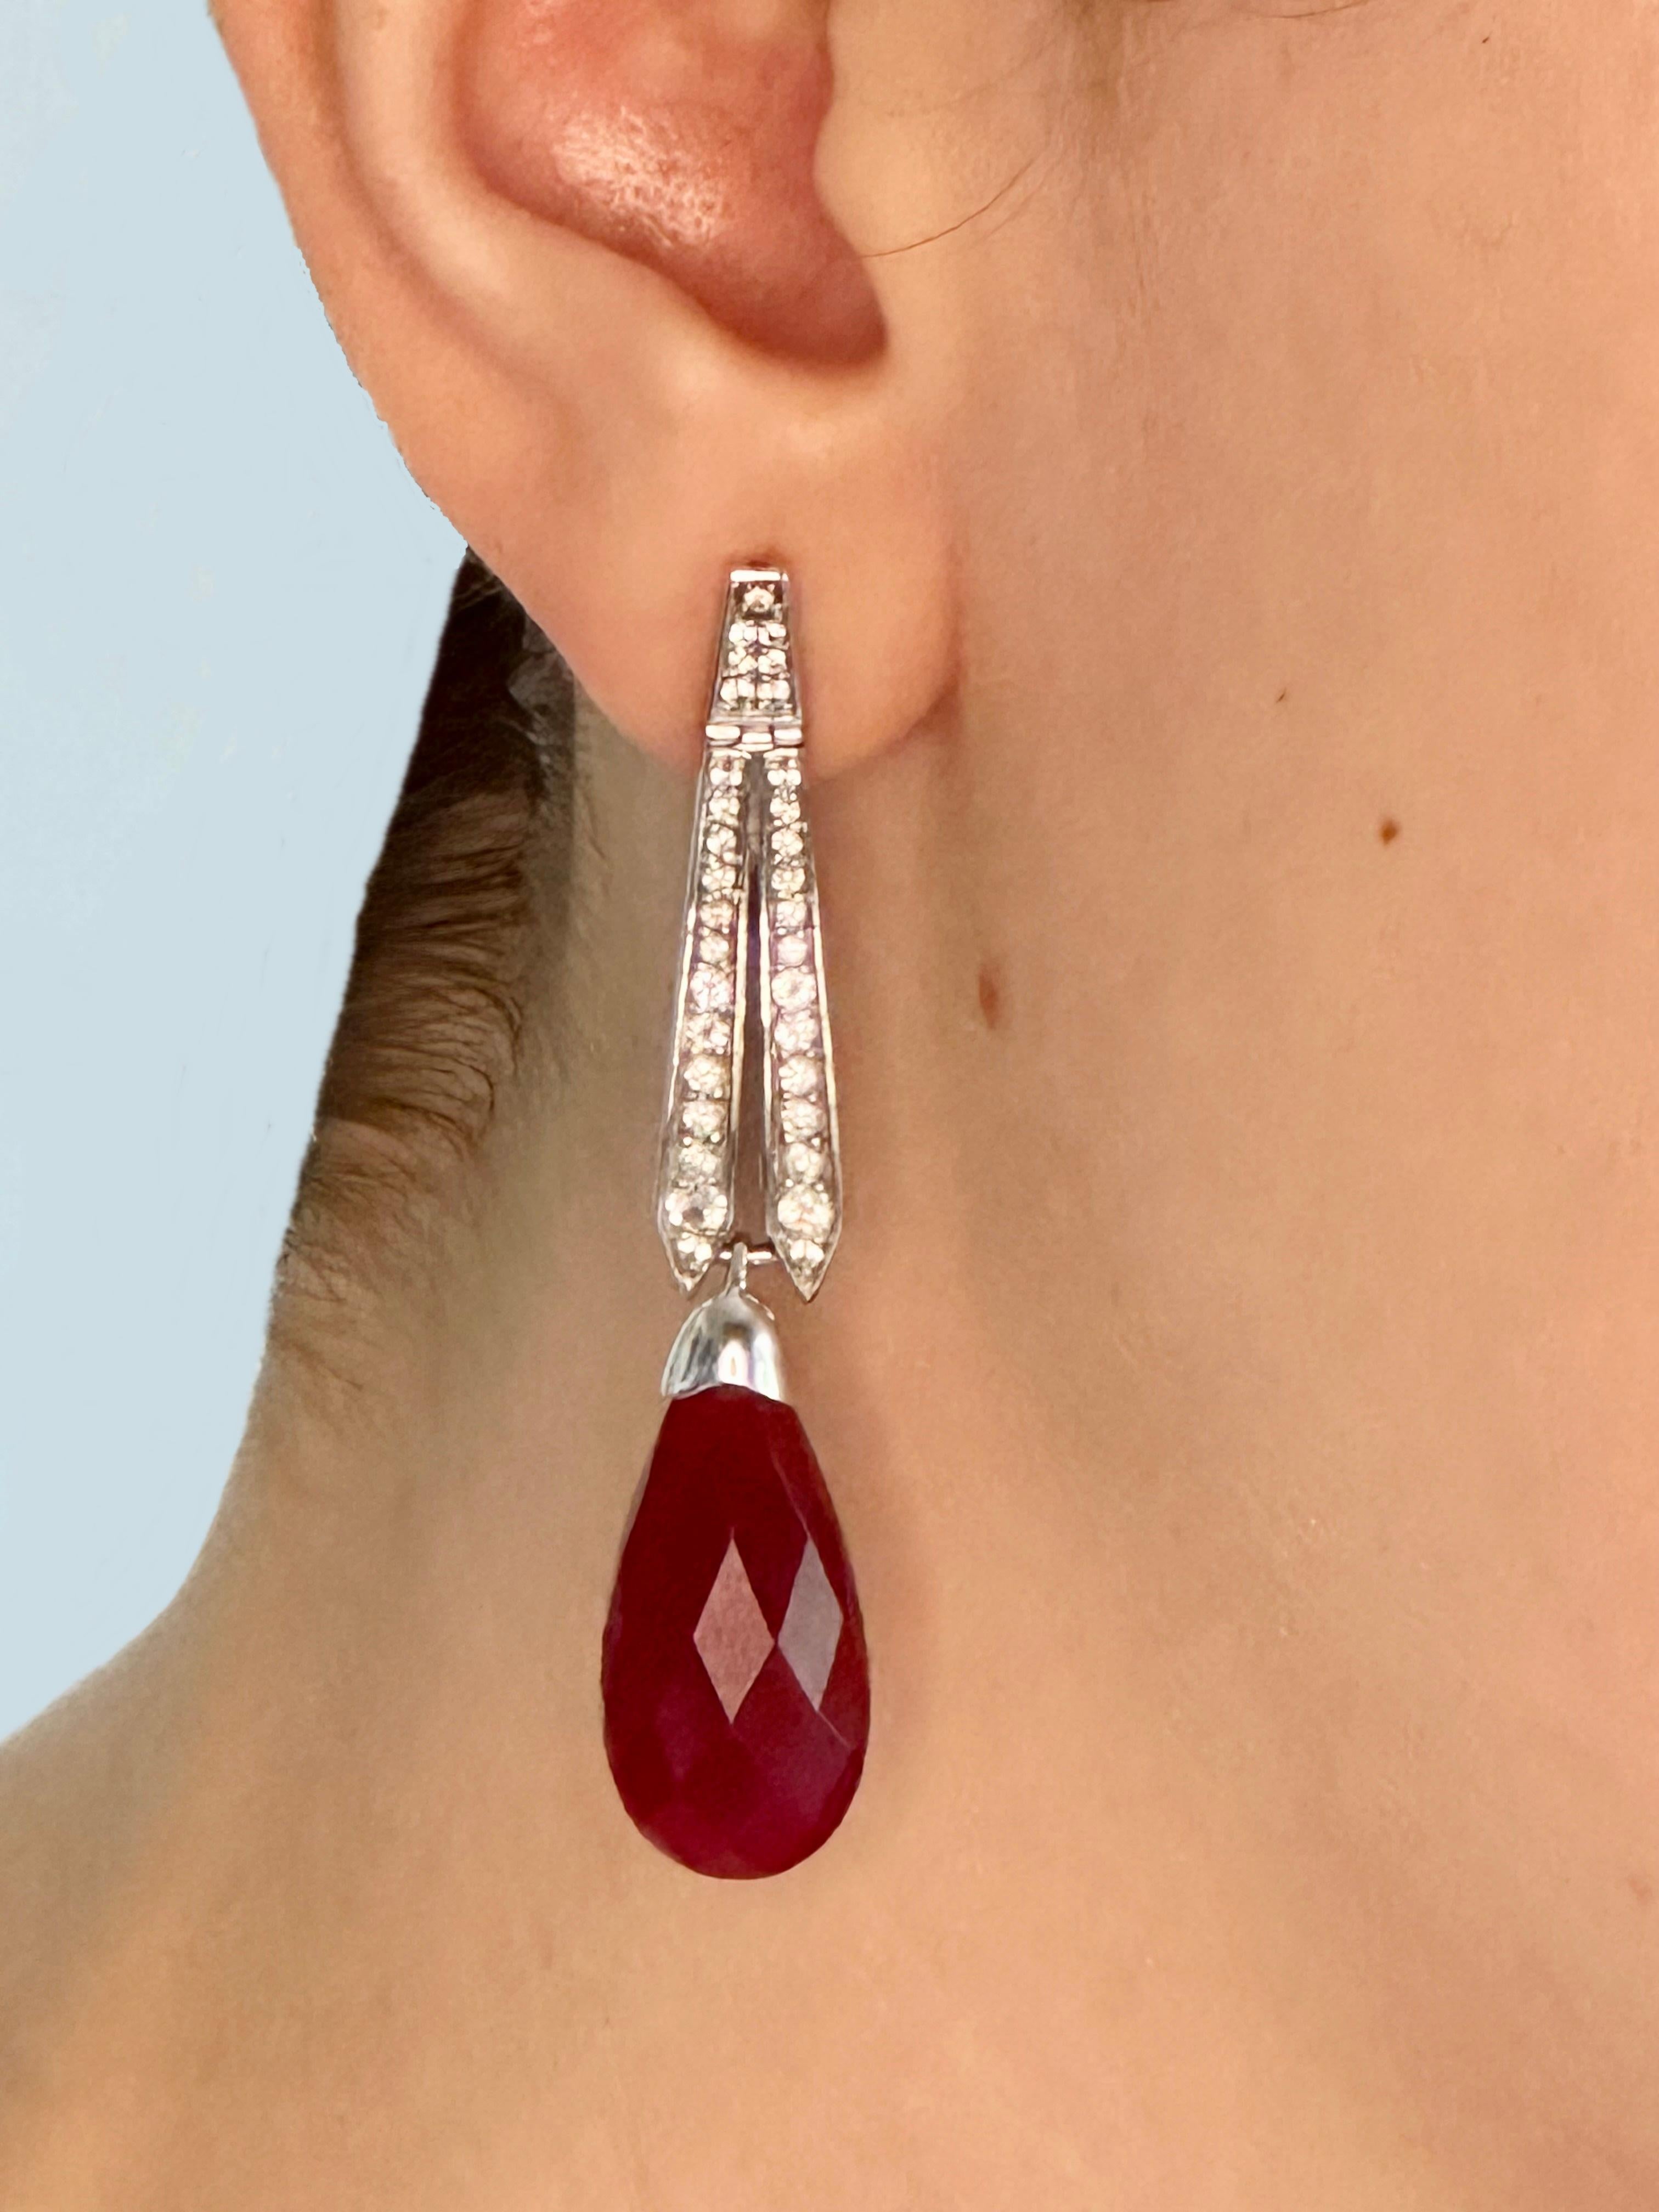 Briolette Cut Eliania Rosetti Earrings in 18k Gold 36.4 Cts of White Topaz  25.7 Cts Red Jade For Sale